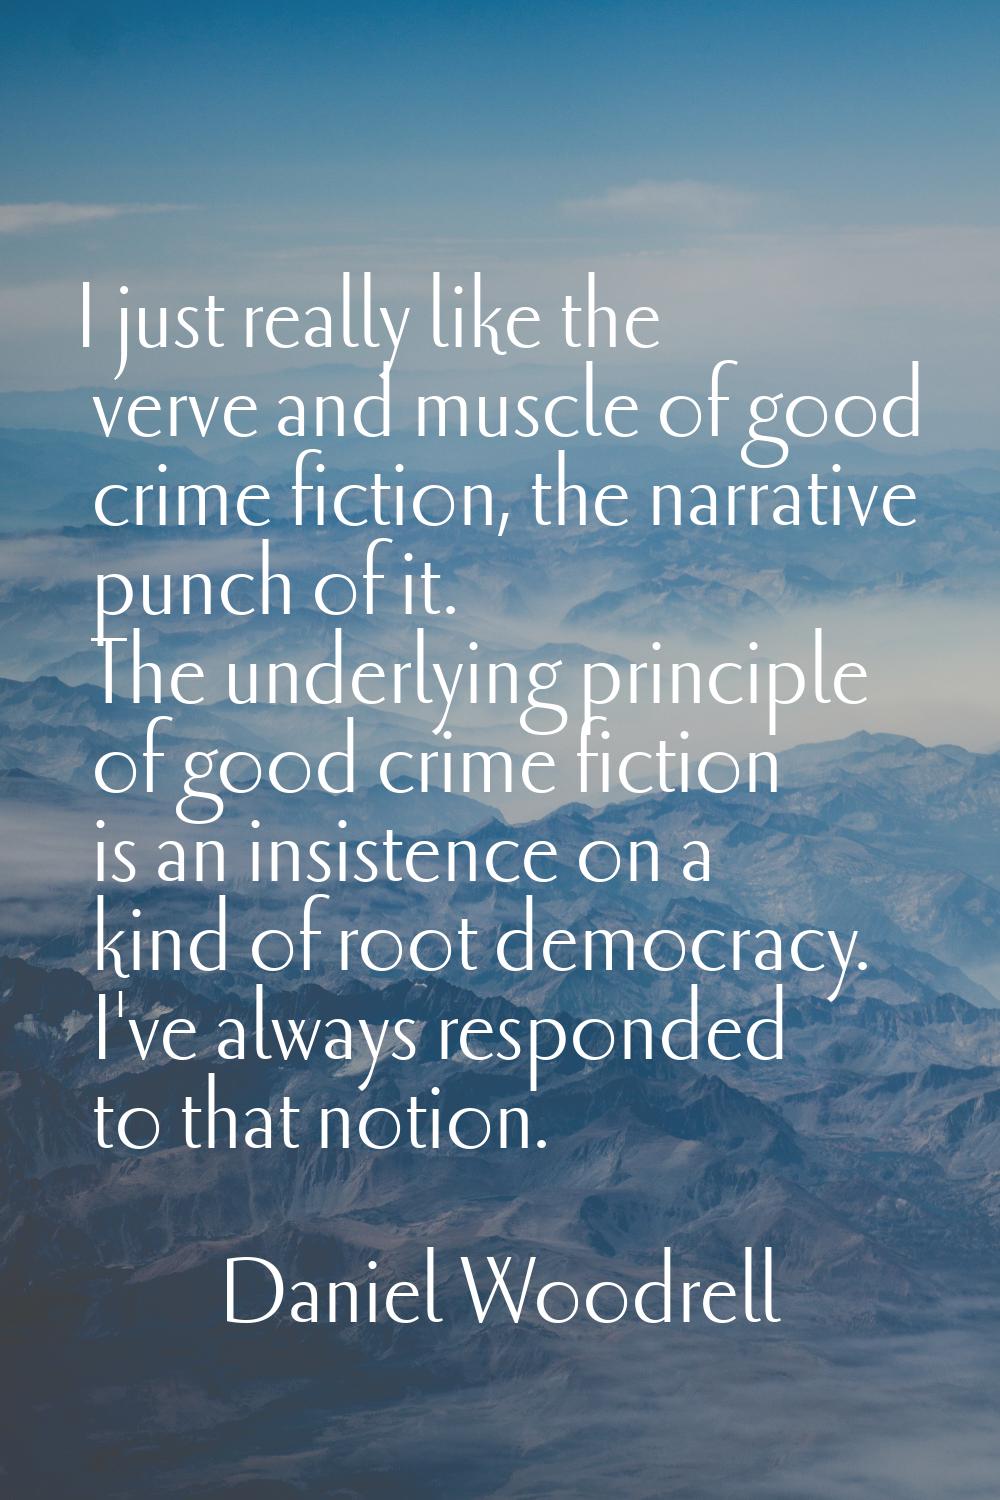 I just really like the verve and muscle of good crime fiction, the narrative punch of it. The under